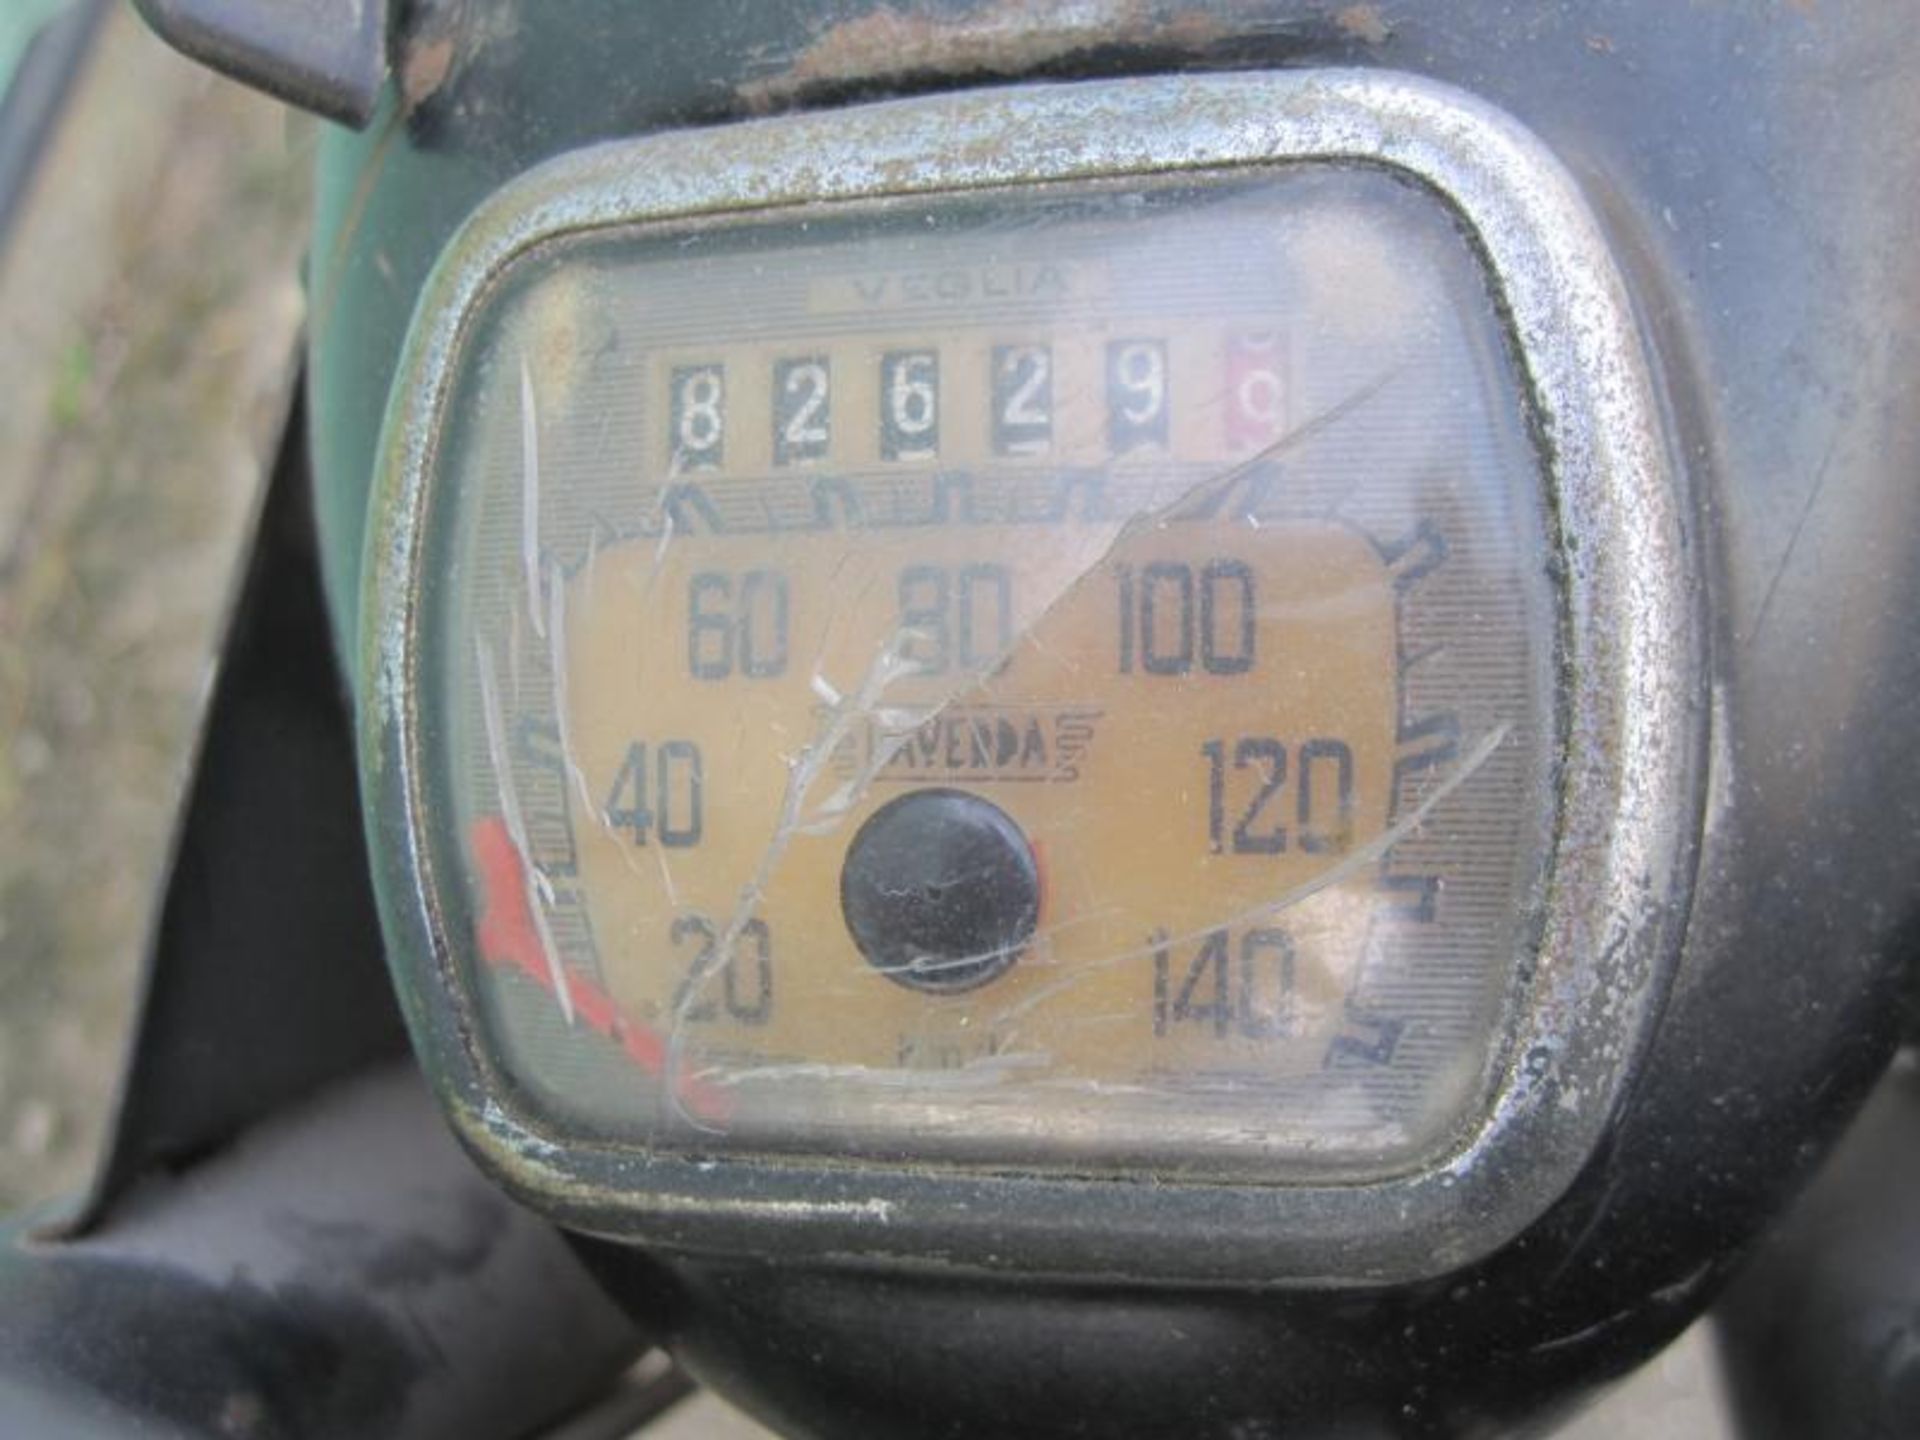 1967 200cc Laverda 200 Twin Reg. No. N/A Frame No. 0602 Engine No. Not found An uncommon example - Image 5 of 9